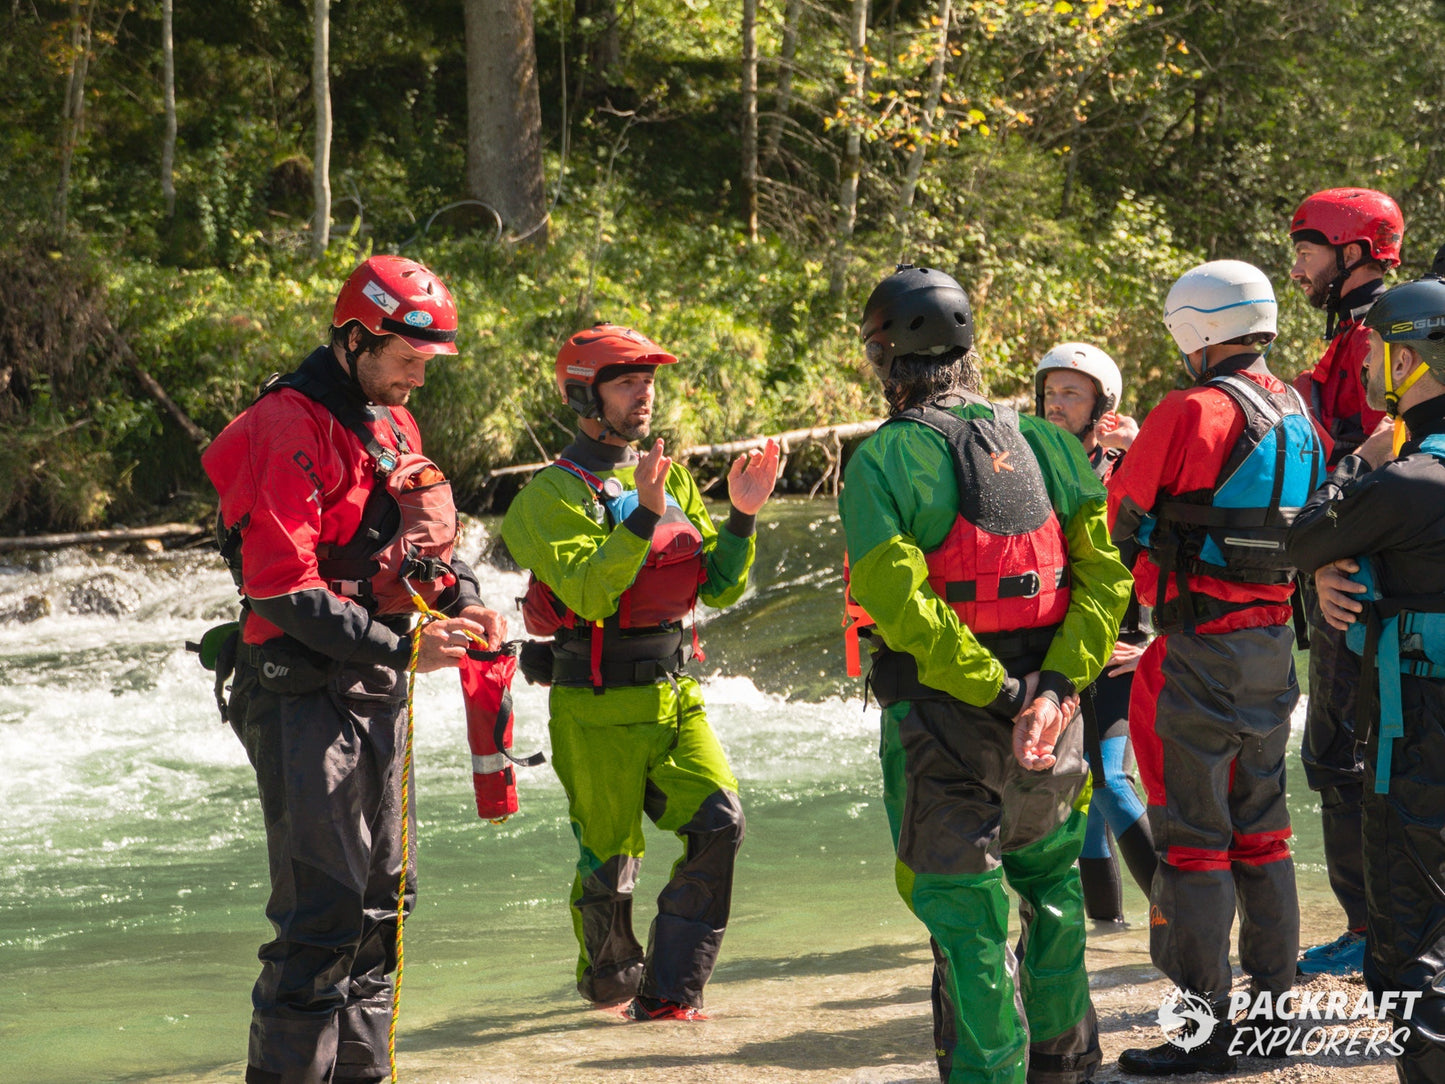 RESCUE 3 WRT-PRO, PACKRAFT SAFETY & RESCUE COURSE 3 DAY